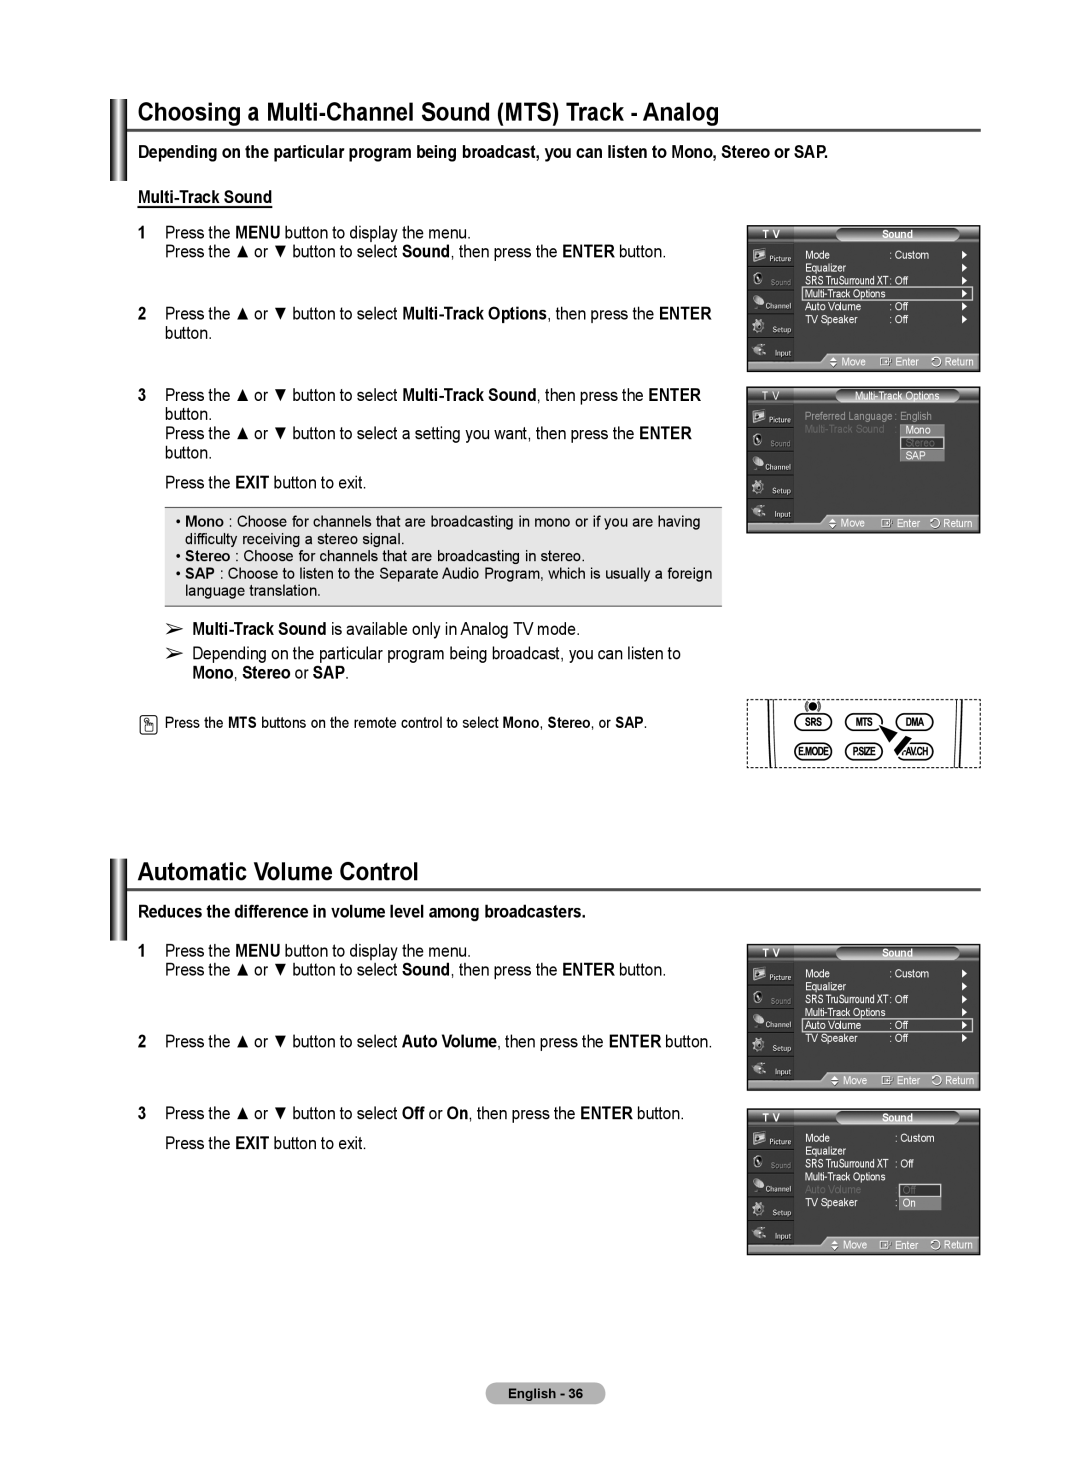 Samsung 460 user manual Choosing a Multi-Channel Sound MTS Track - Analog, Automatic Volume Control, Multi-Track Sound 